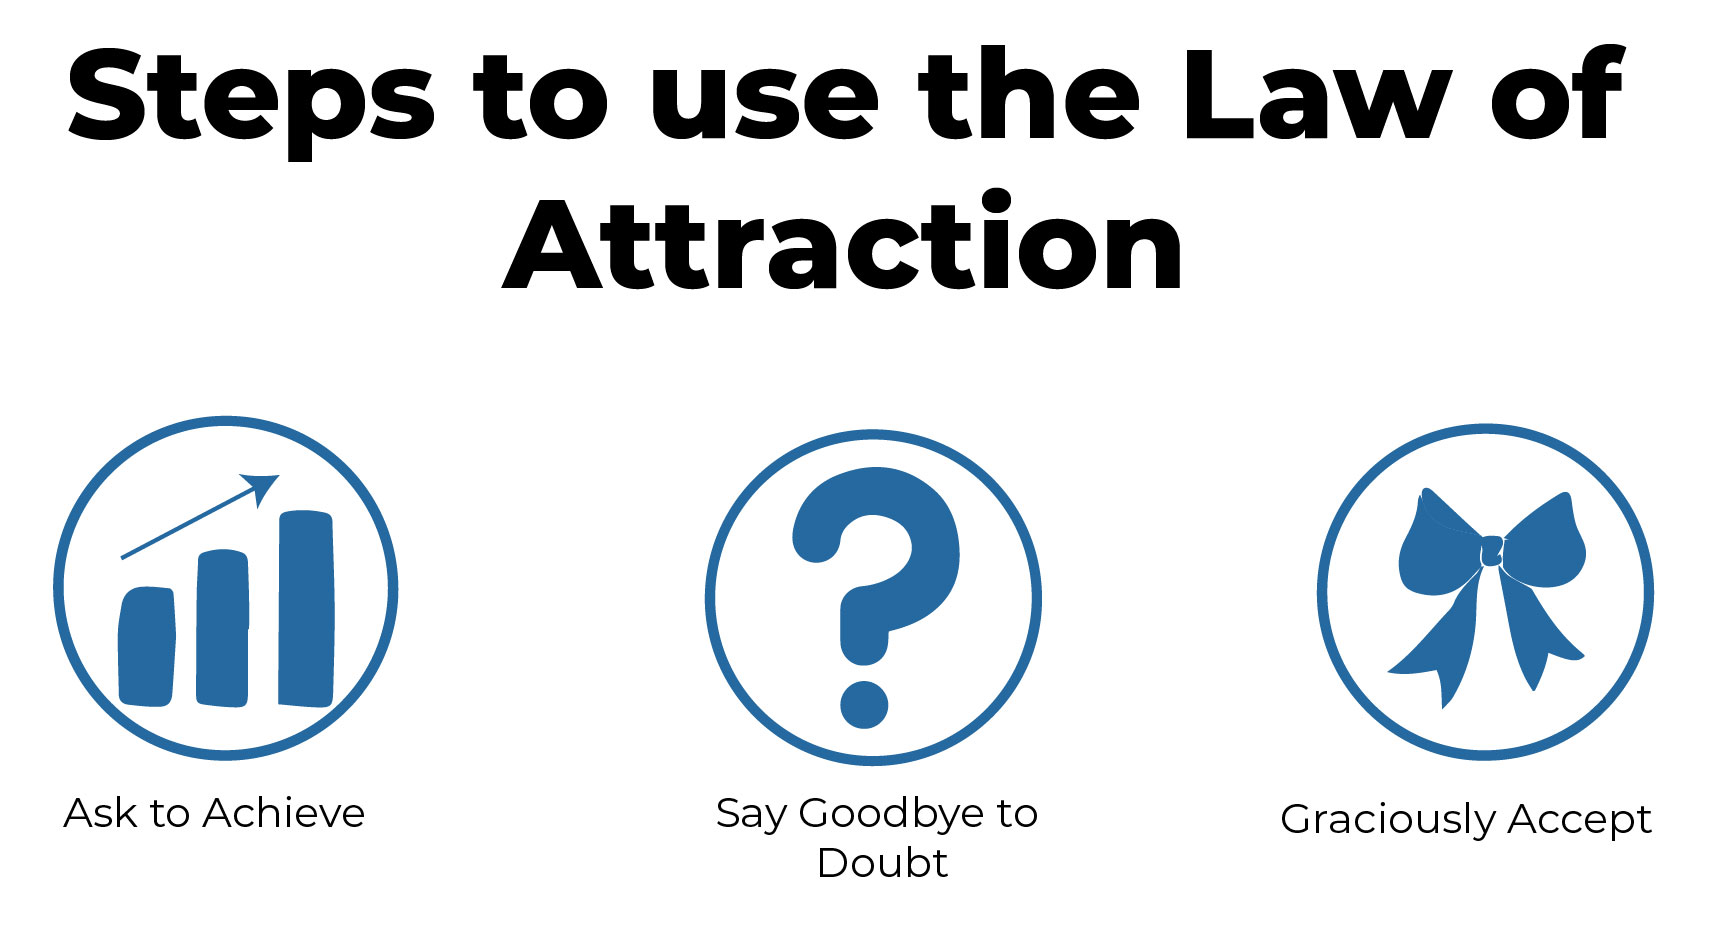 STEPS TO USE THE LAW OF ATTRACTION